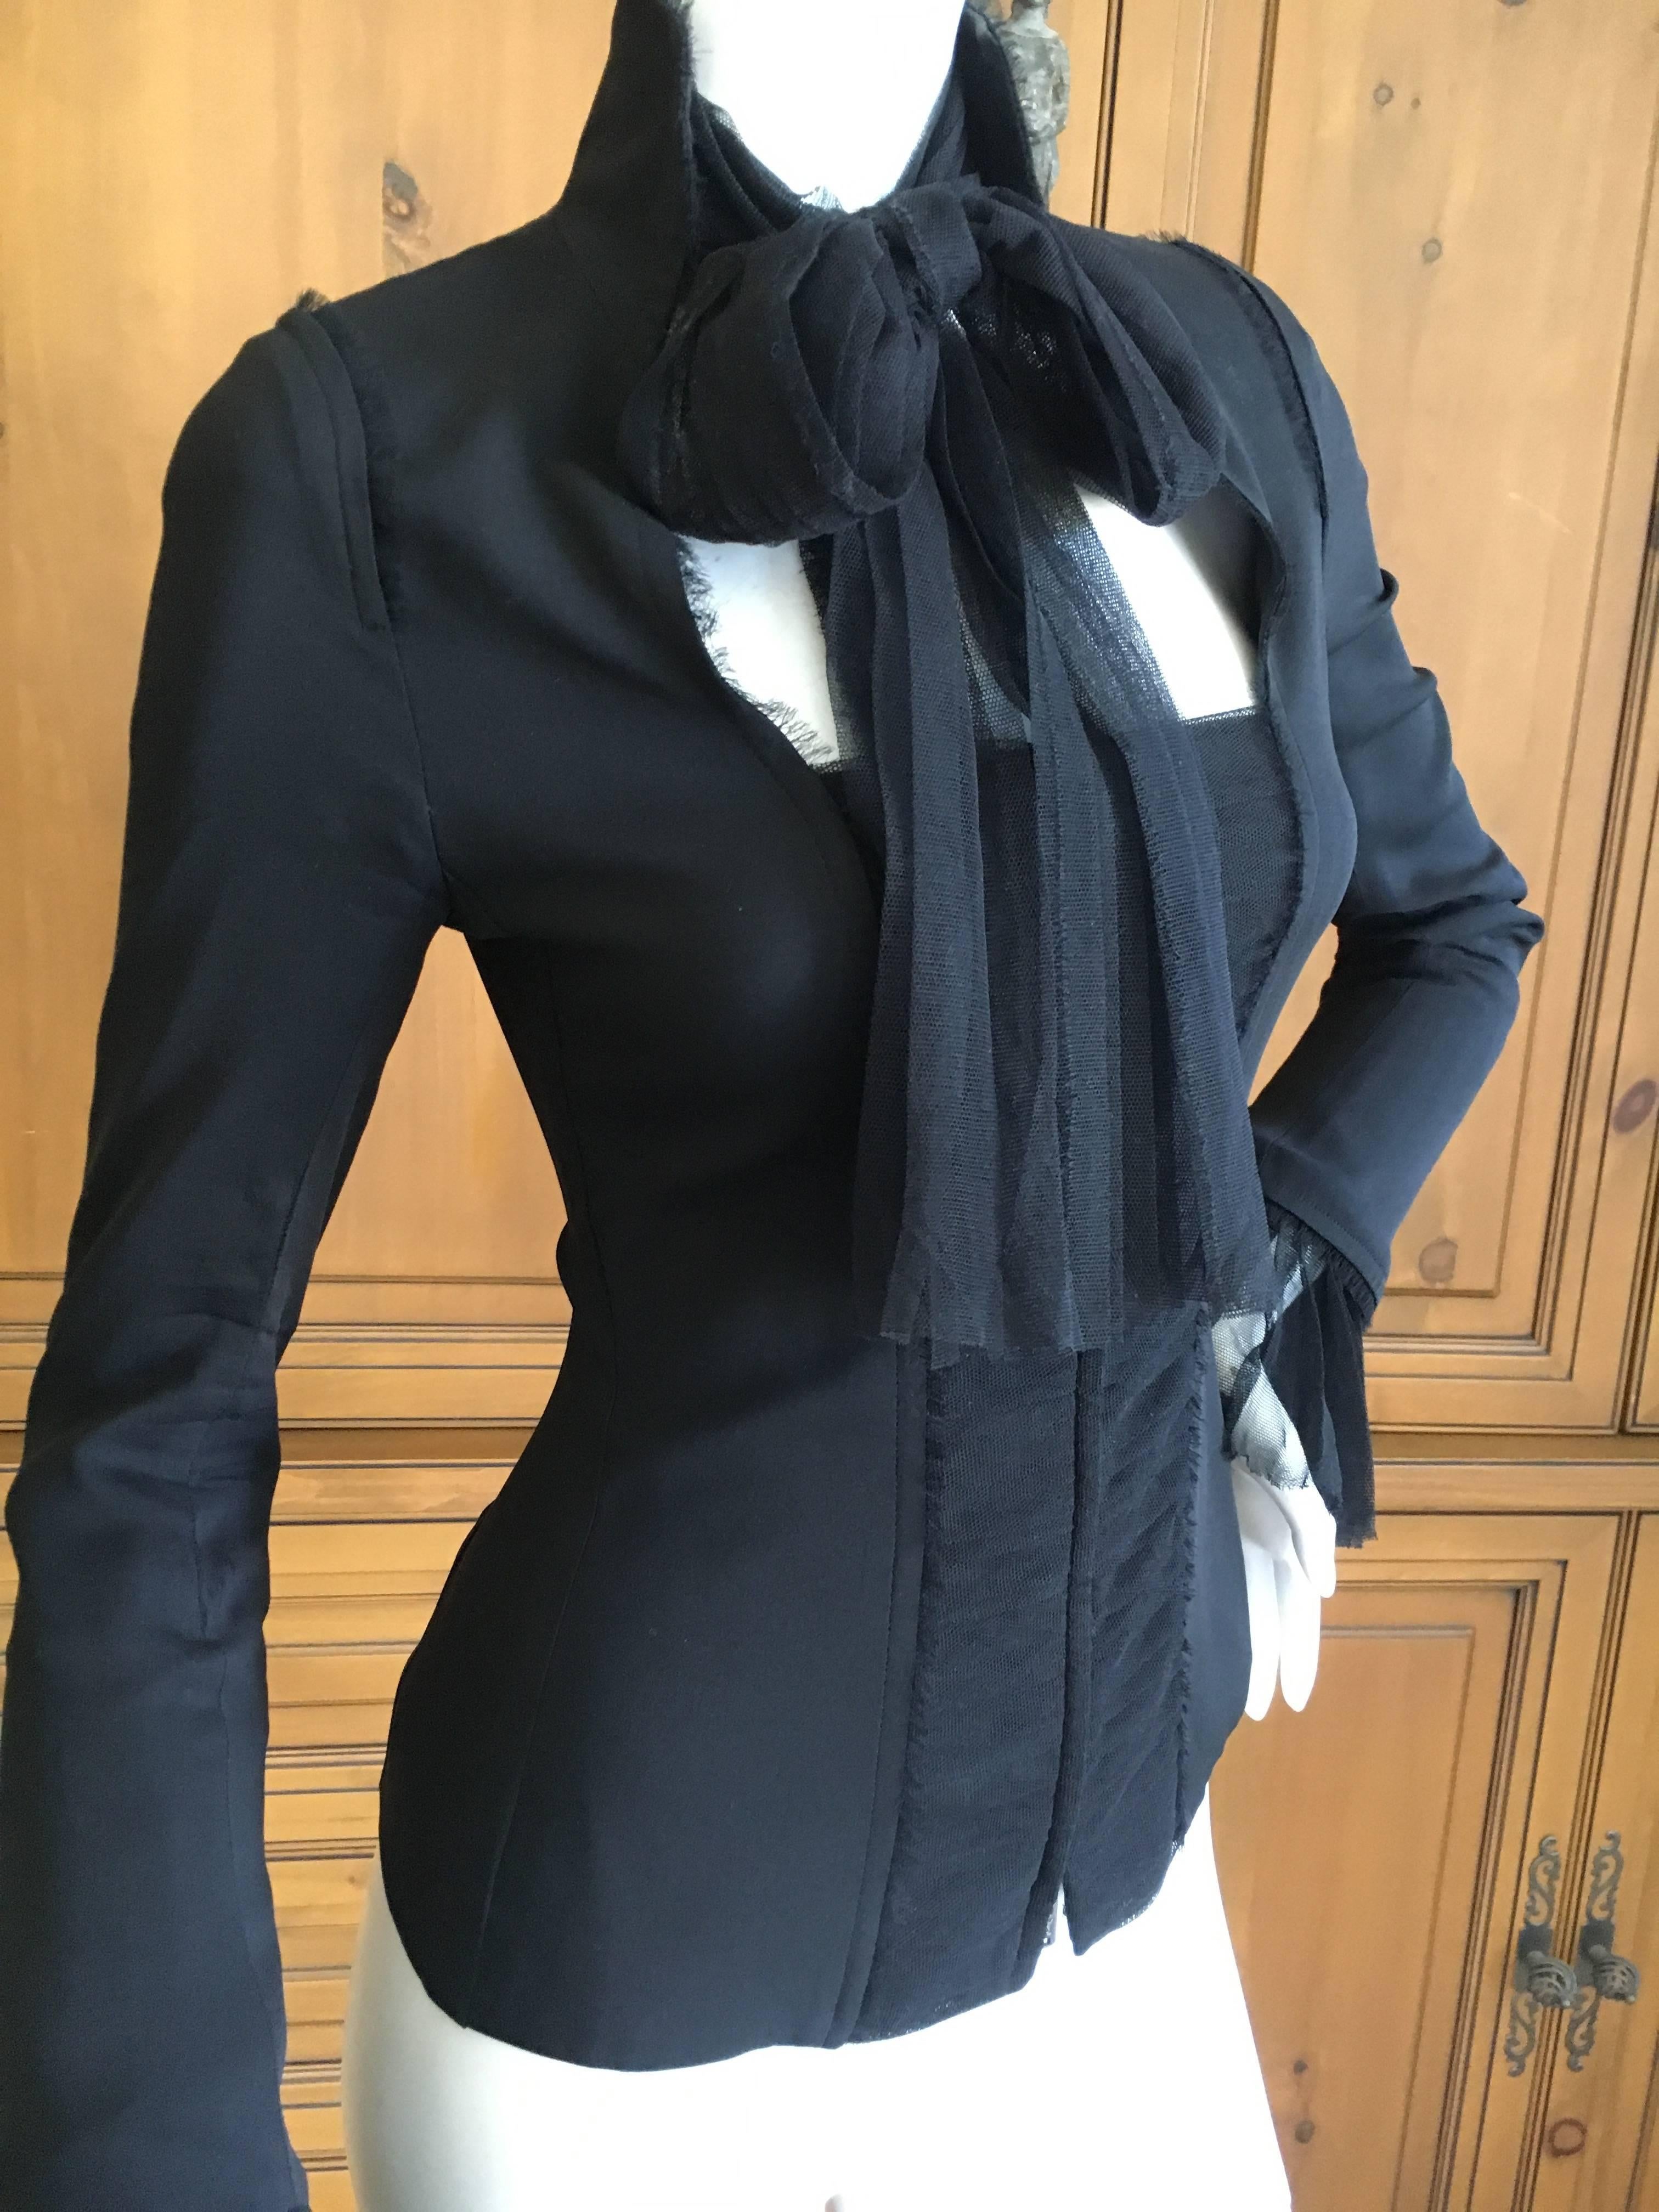 Women's Yves Saint Laurent by Tom Ford Tie Front Black Jacket